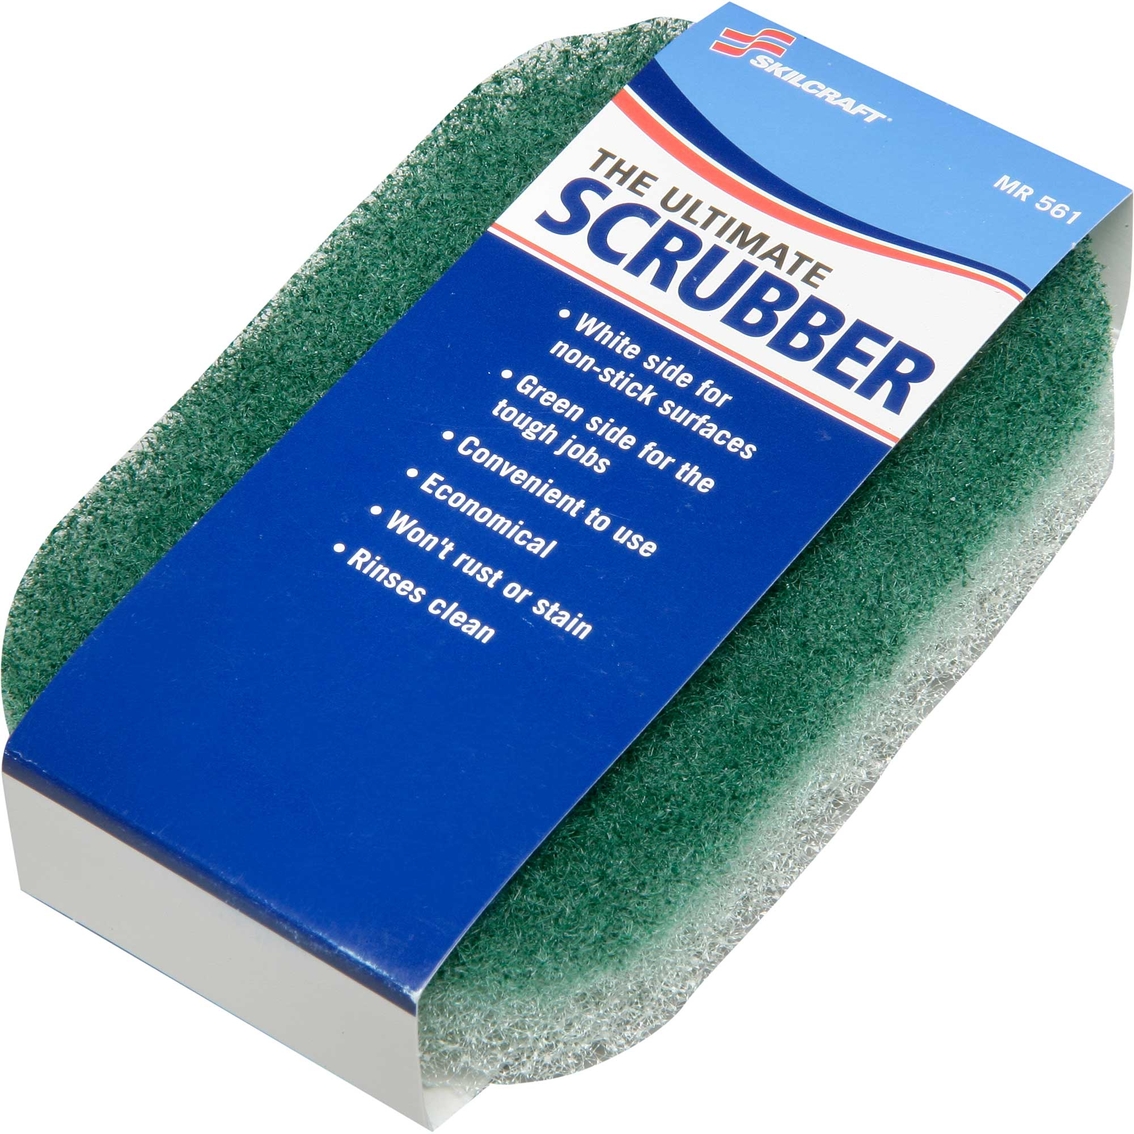 Skilcraft Nylon Scrubber Pad, Cleaning Tools, Household